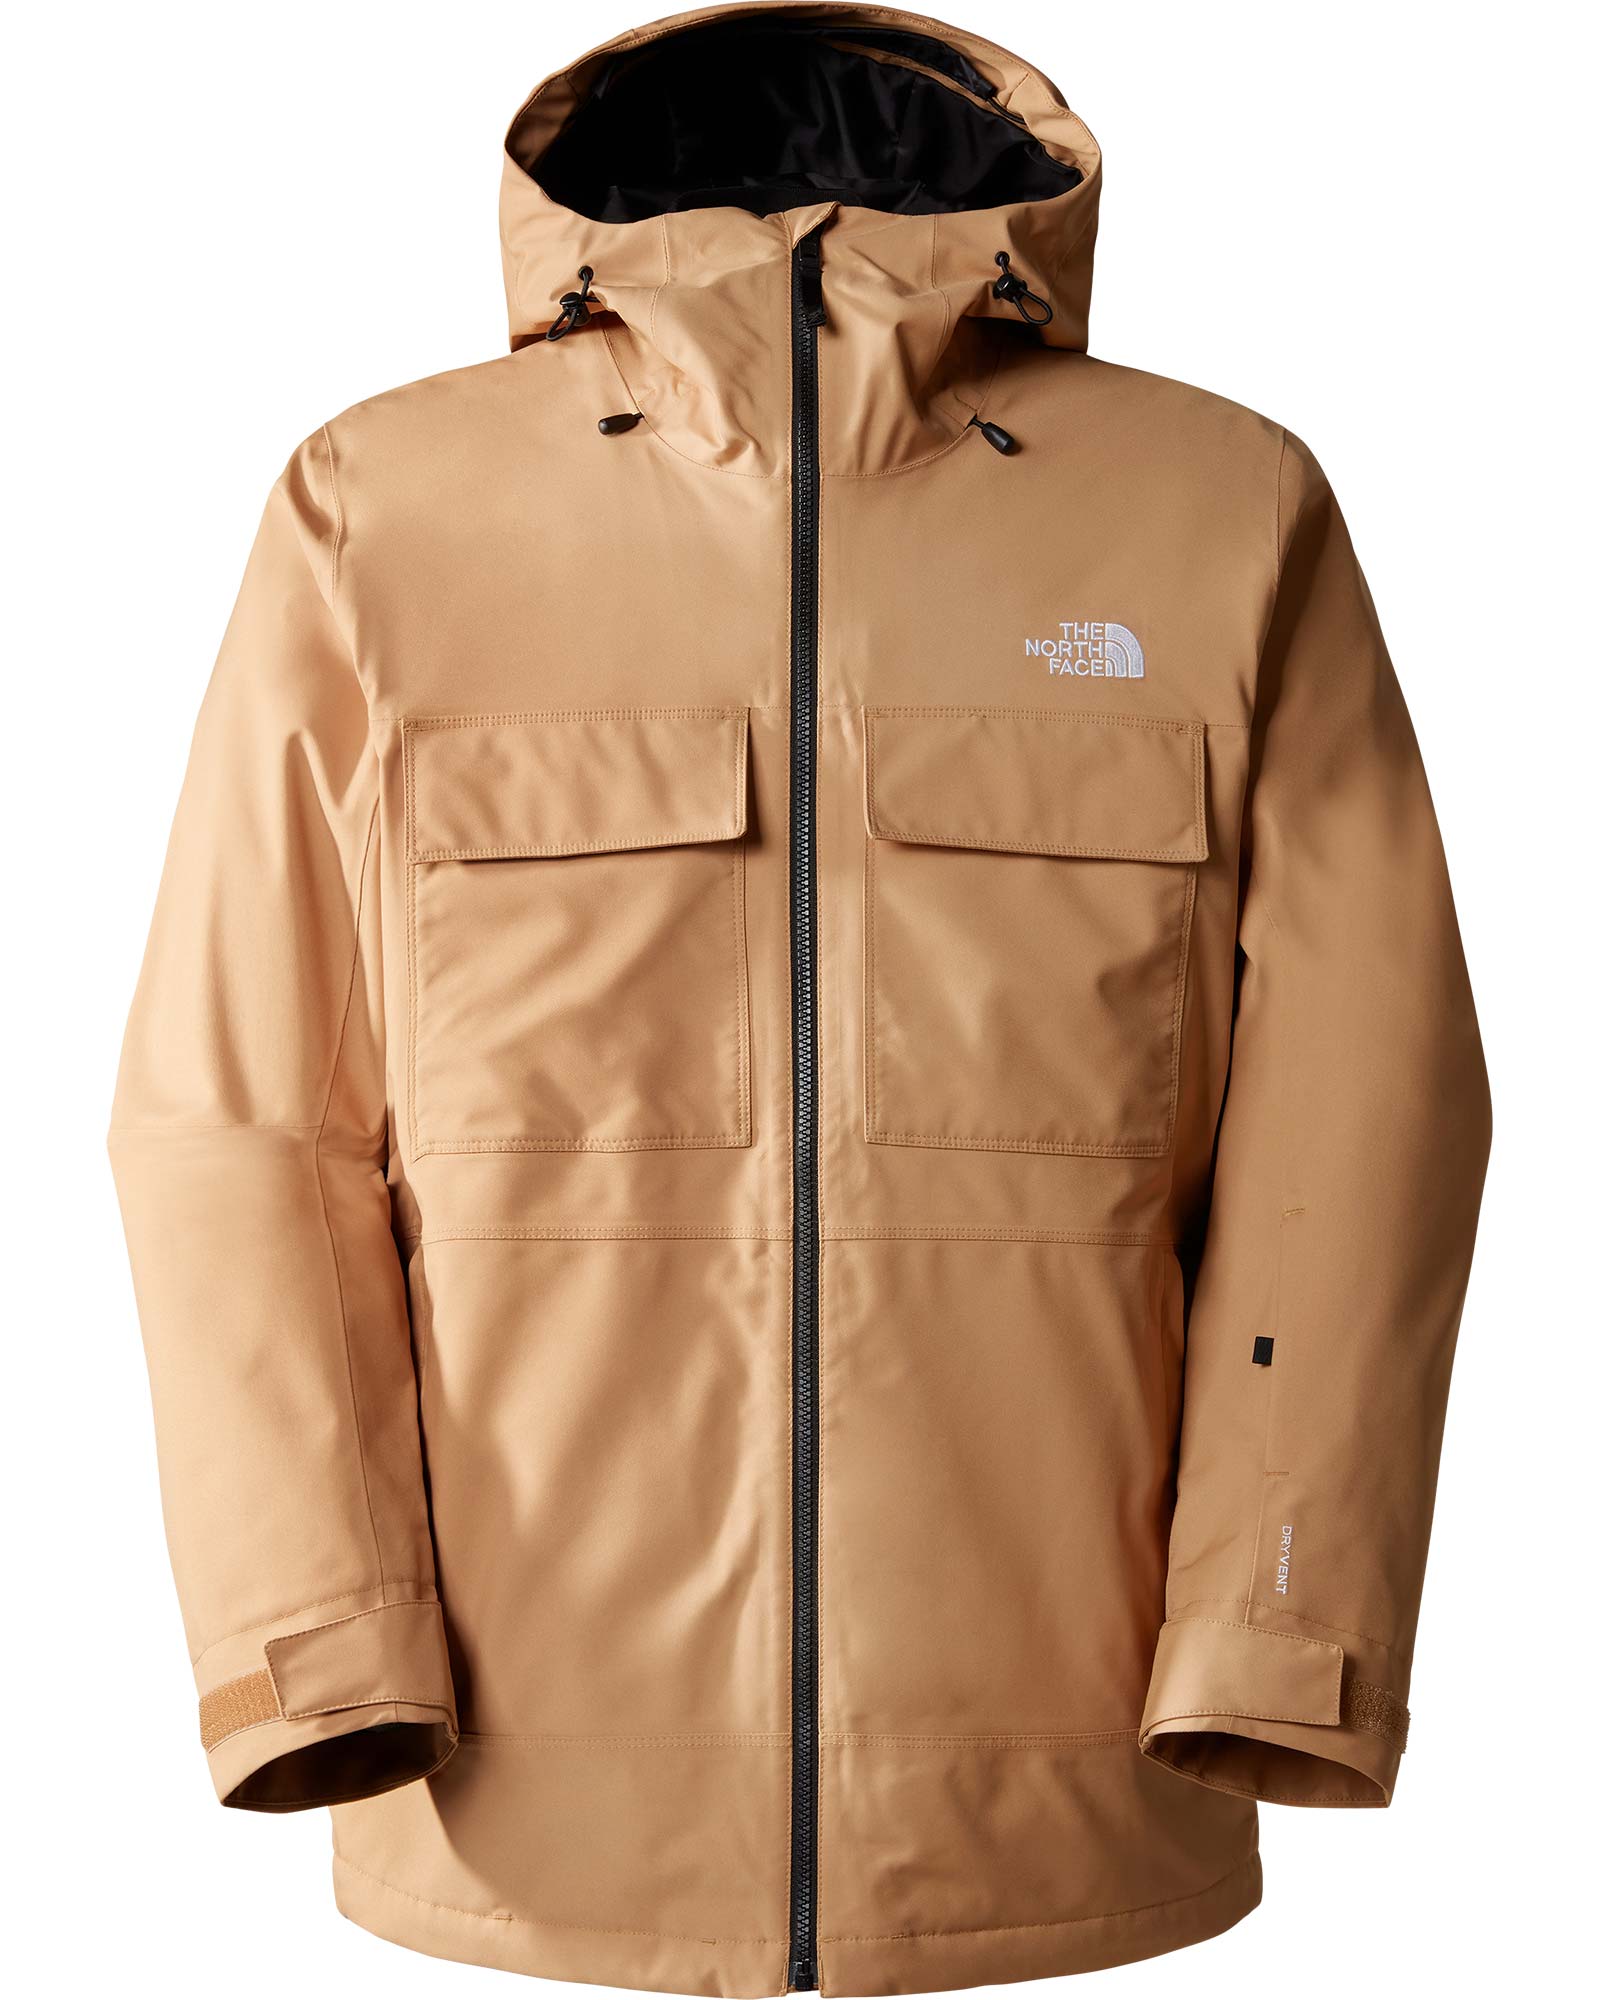 The North Face Men’s Fourbarrel Triclimate Jacket - Almond Butter/TNF Black S